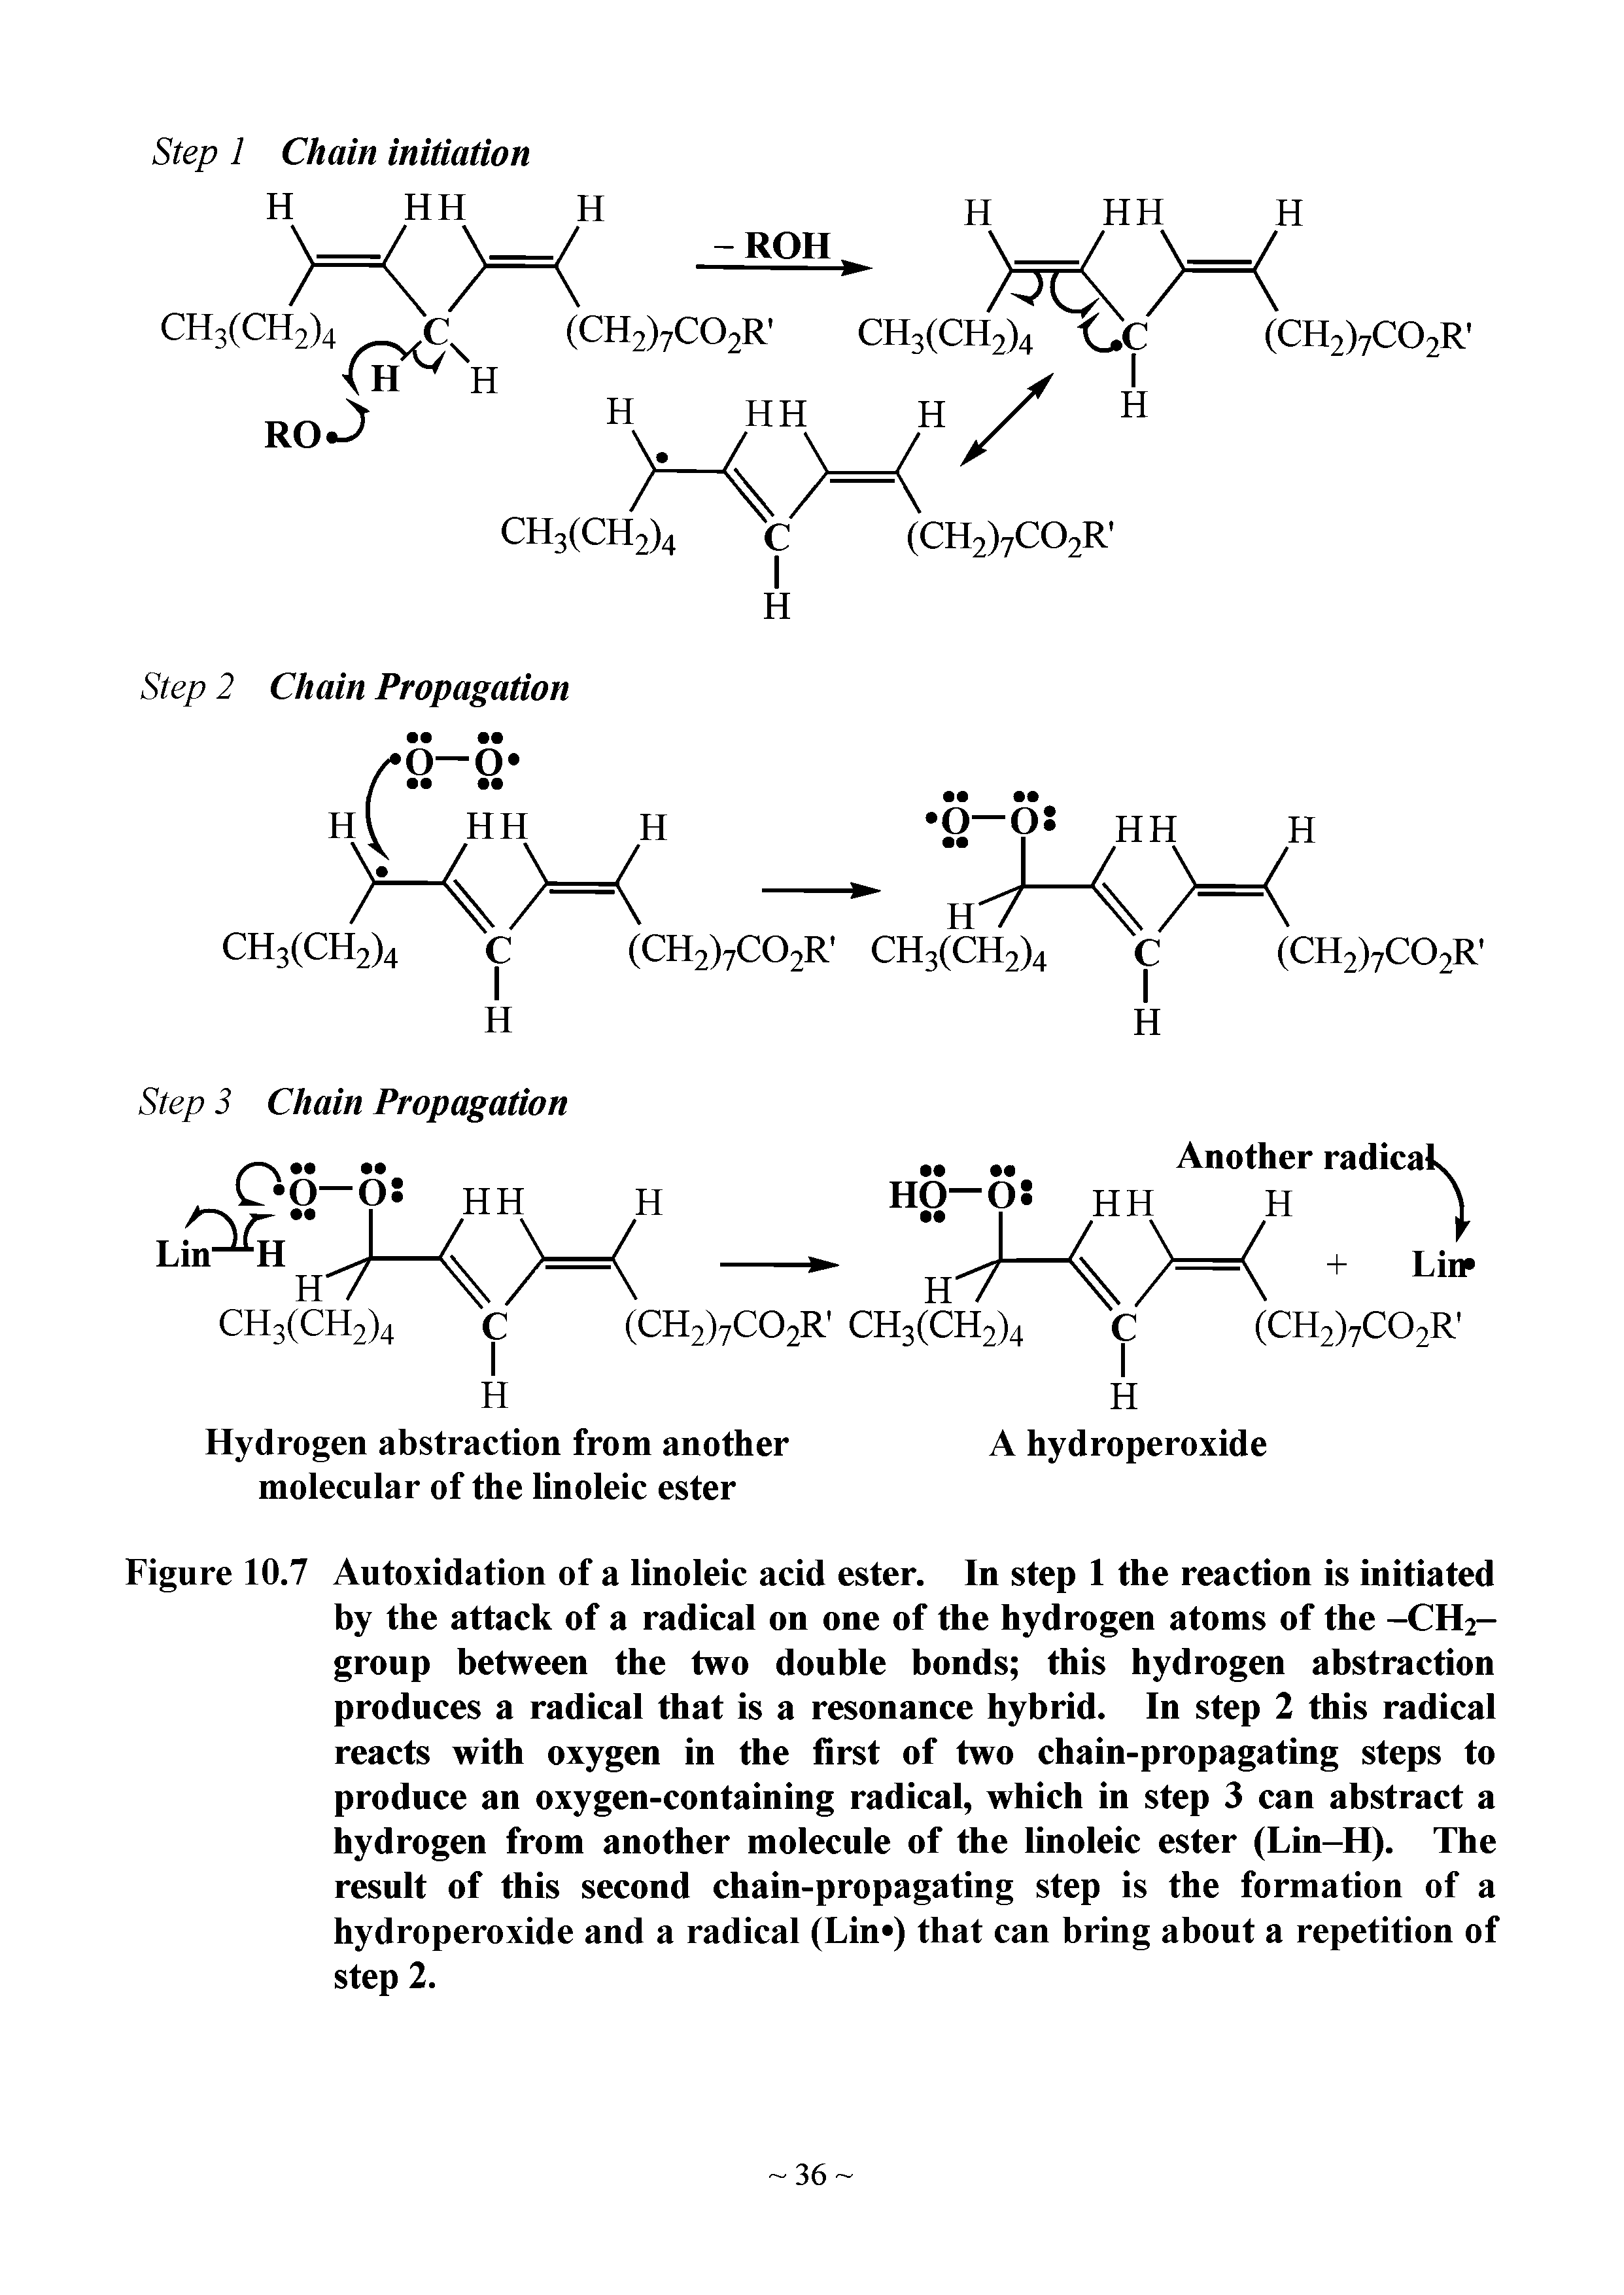 Figure 10.7 Autoxidation of a linoleic acid ester. In step 1 the reaction is initiated by the attack of a radical on one of the hydrogen atoms of the -CH2-group between the two double bonds this hydrogen abstraction produces a radical that is a resonance hybrid. In step 2 this radical reacts with oxygen in the first of two chain-propagating steps to produce an oxygen-containing radical, which in step 3 can abstract a hydrogen from another molecule of the linoleic ester (Lin-H). The result of this second chain-propagating step is the formation of a hydroperoxide and a radical (Lin ) that can bring about a repetition of step 2.